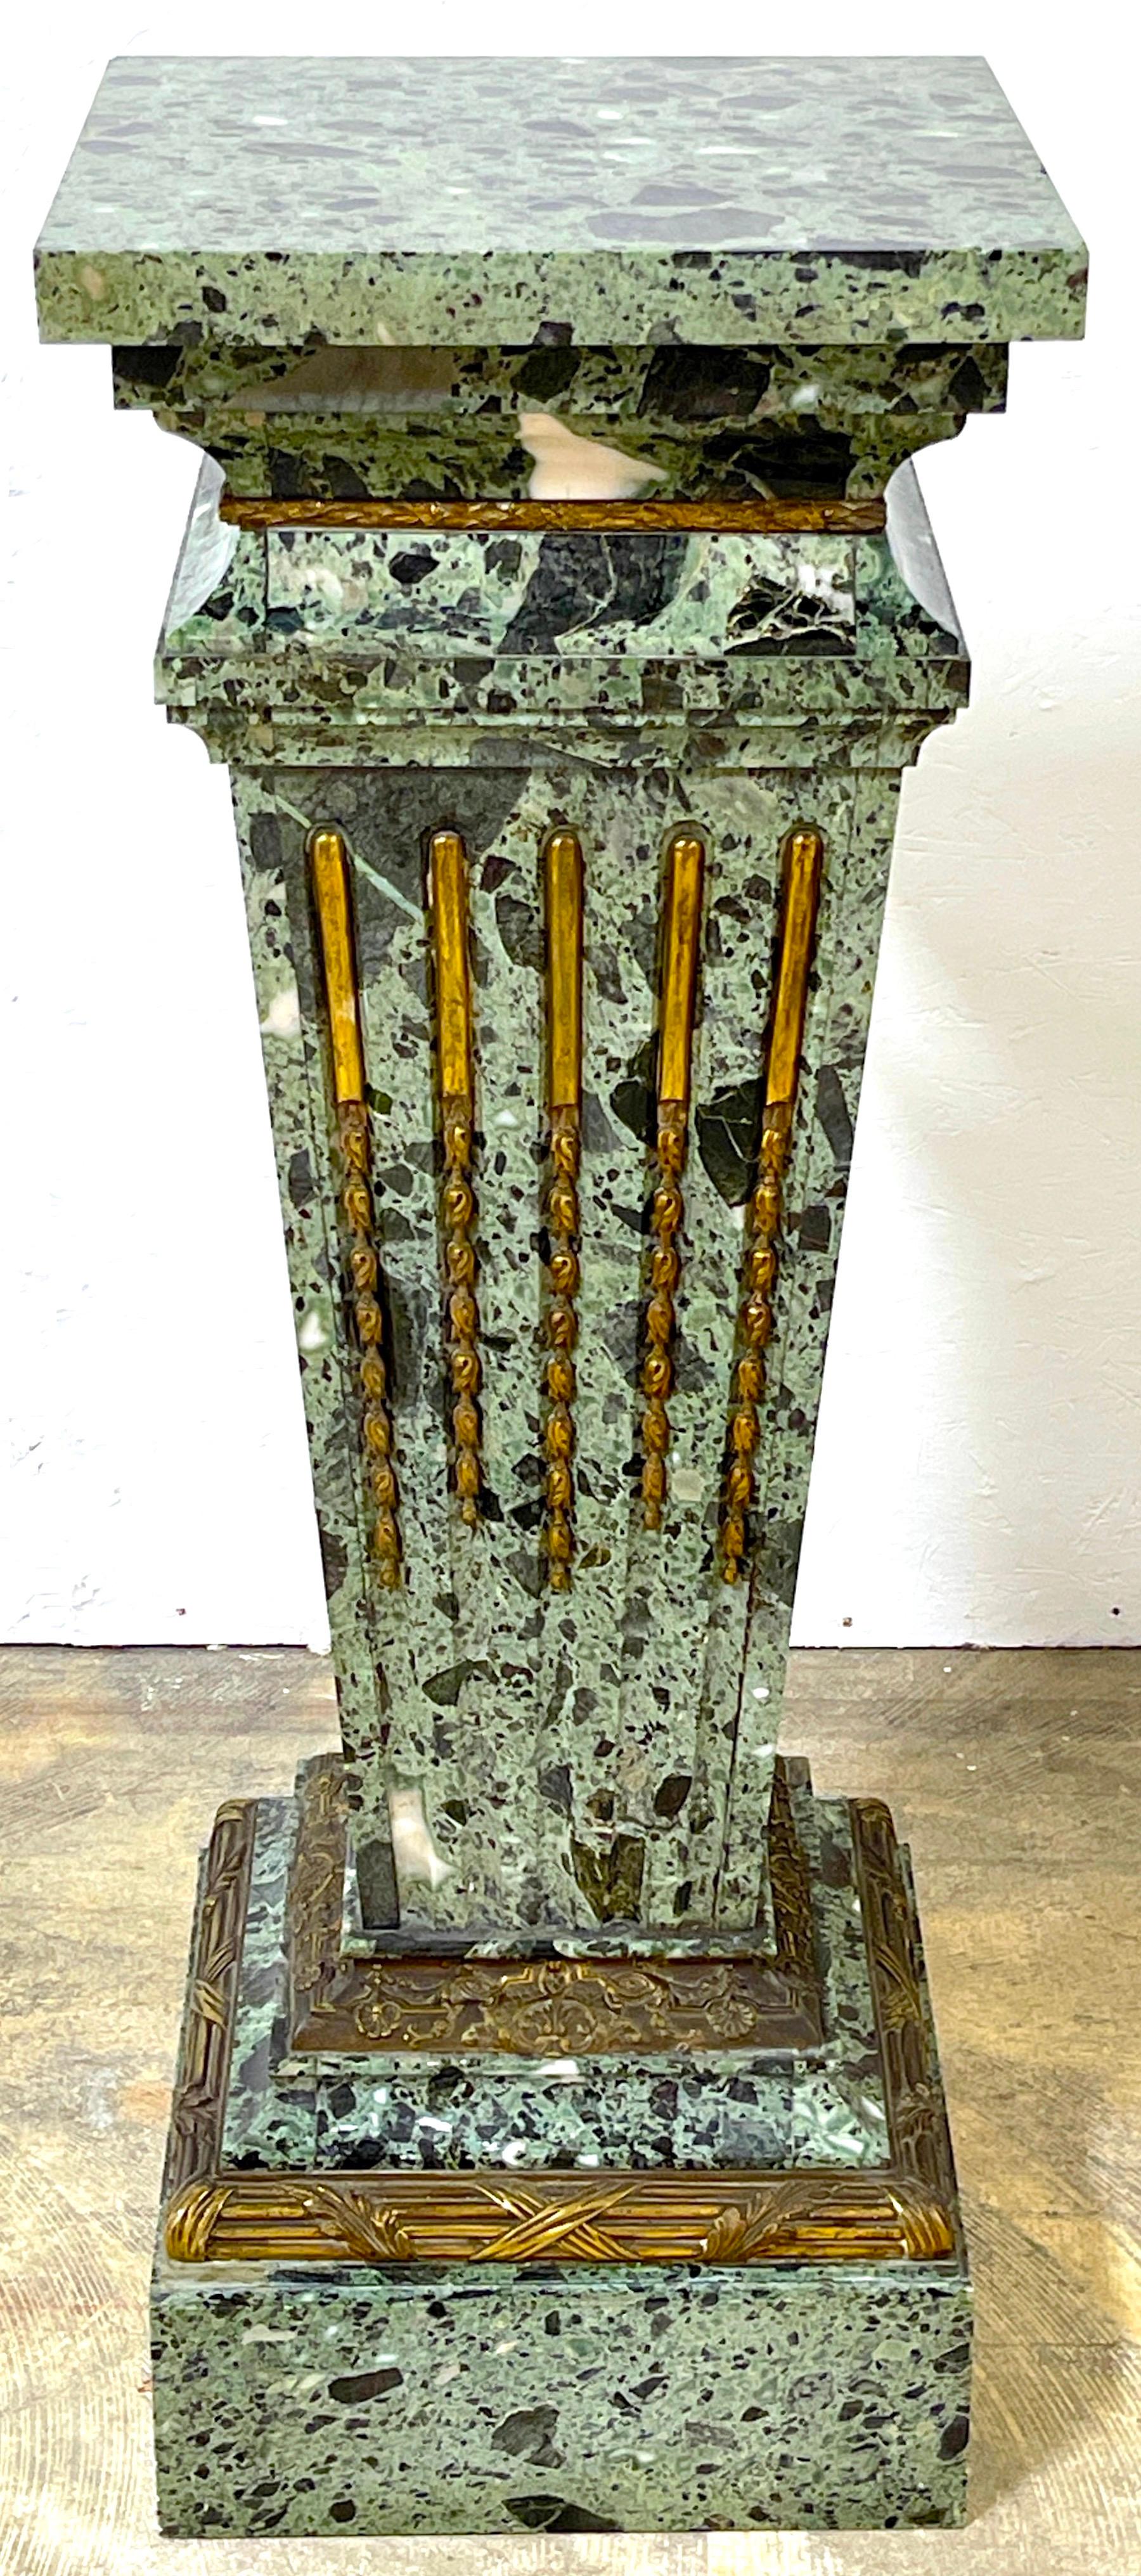 Magnificent French Neoclassical Ormolu Mounted Verdigris Marble Pedestal 
France, Paris, Late 19th century 

This magnificent French neoclassical ormolu mounted verdigris marble pedestal from late 19th-century Paris is a true work of art. It